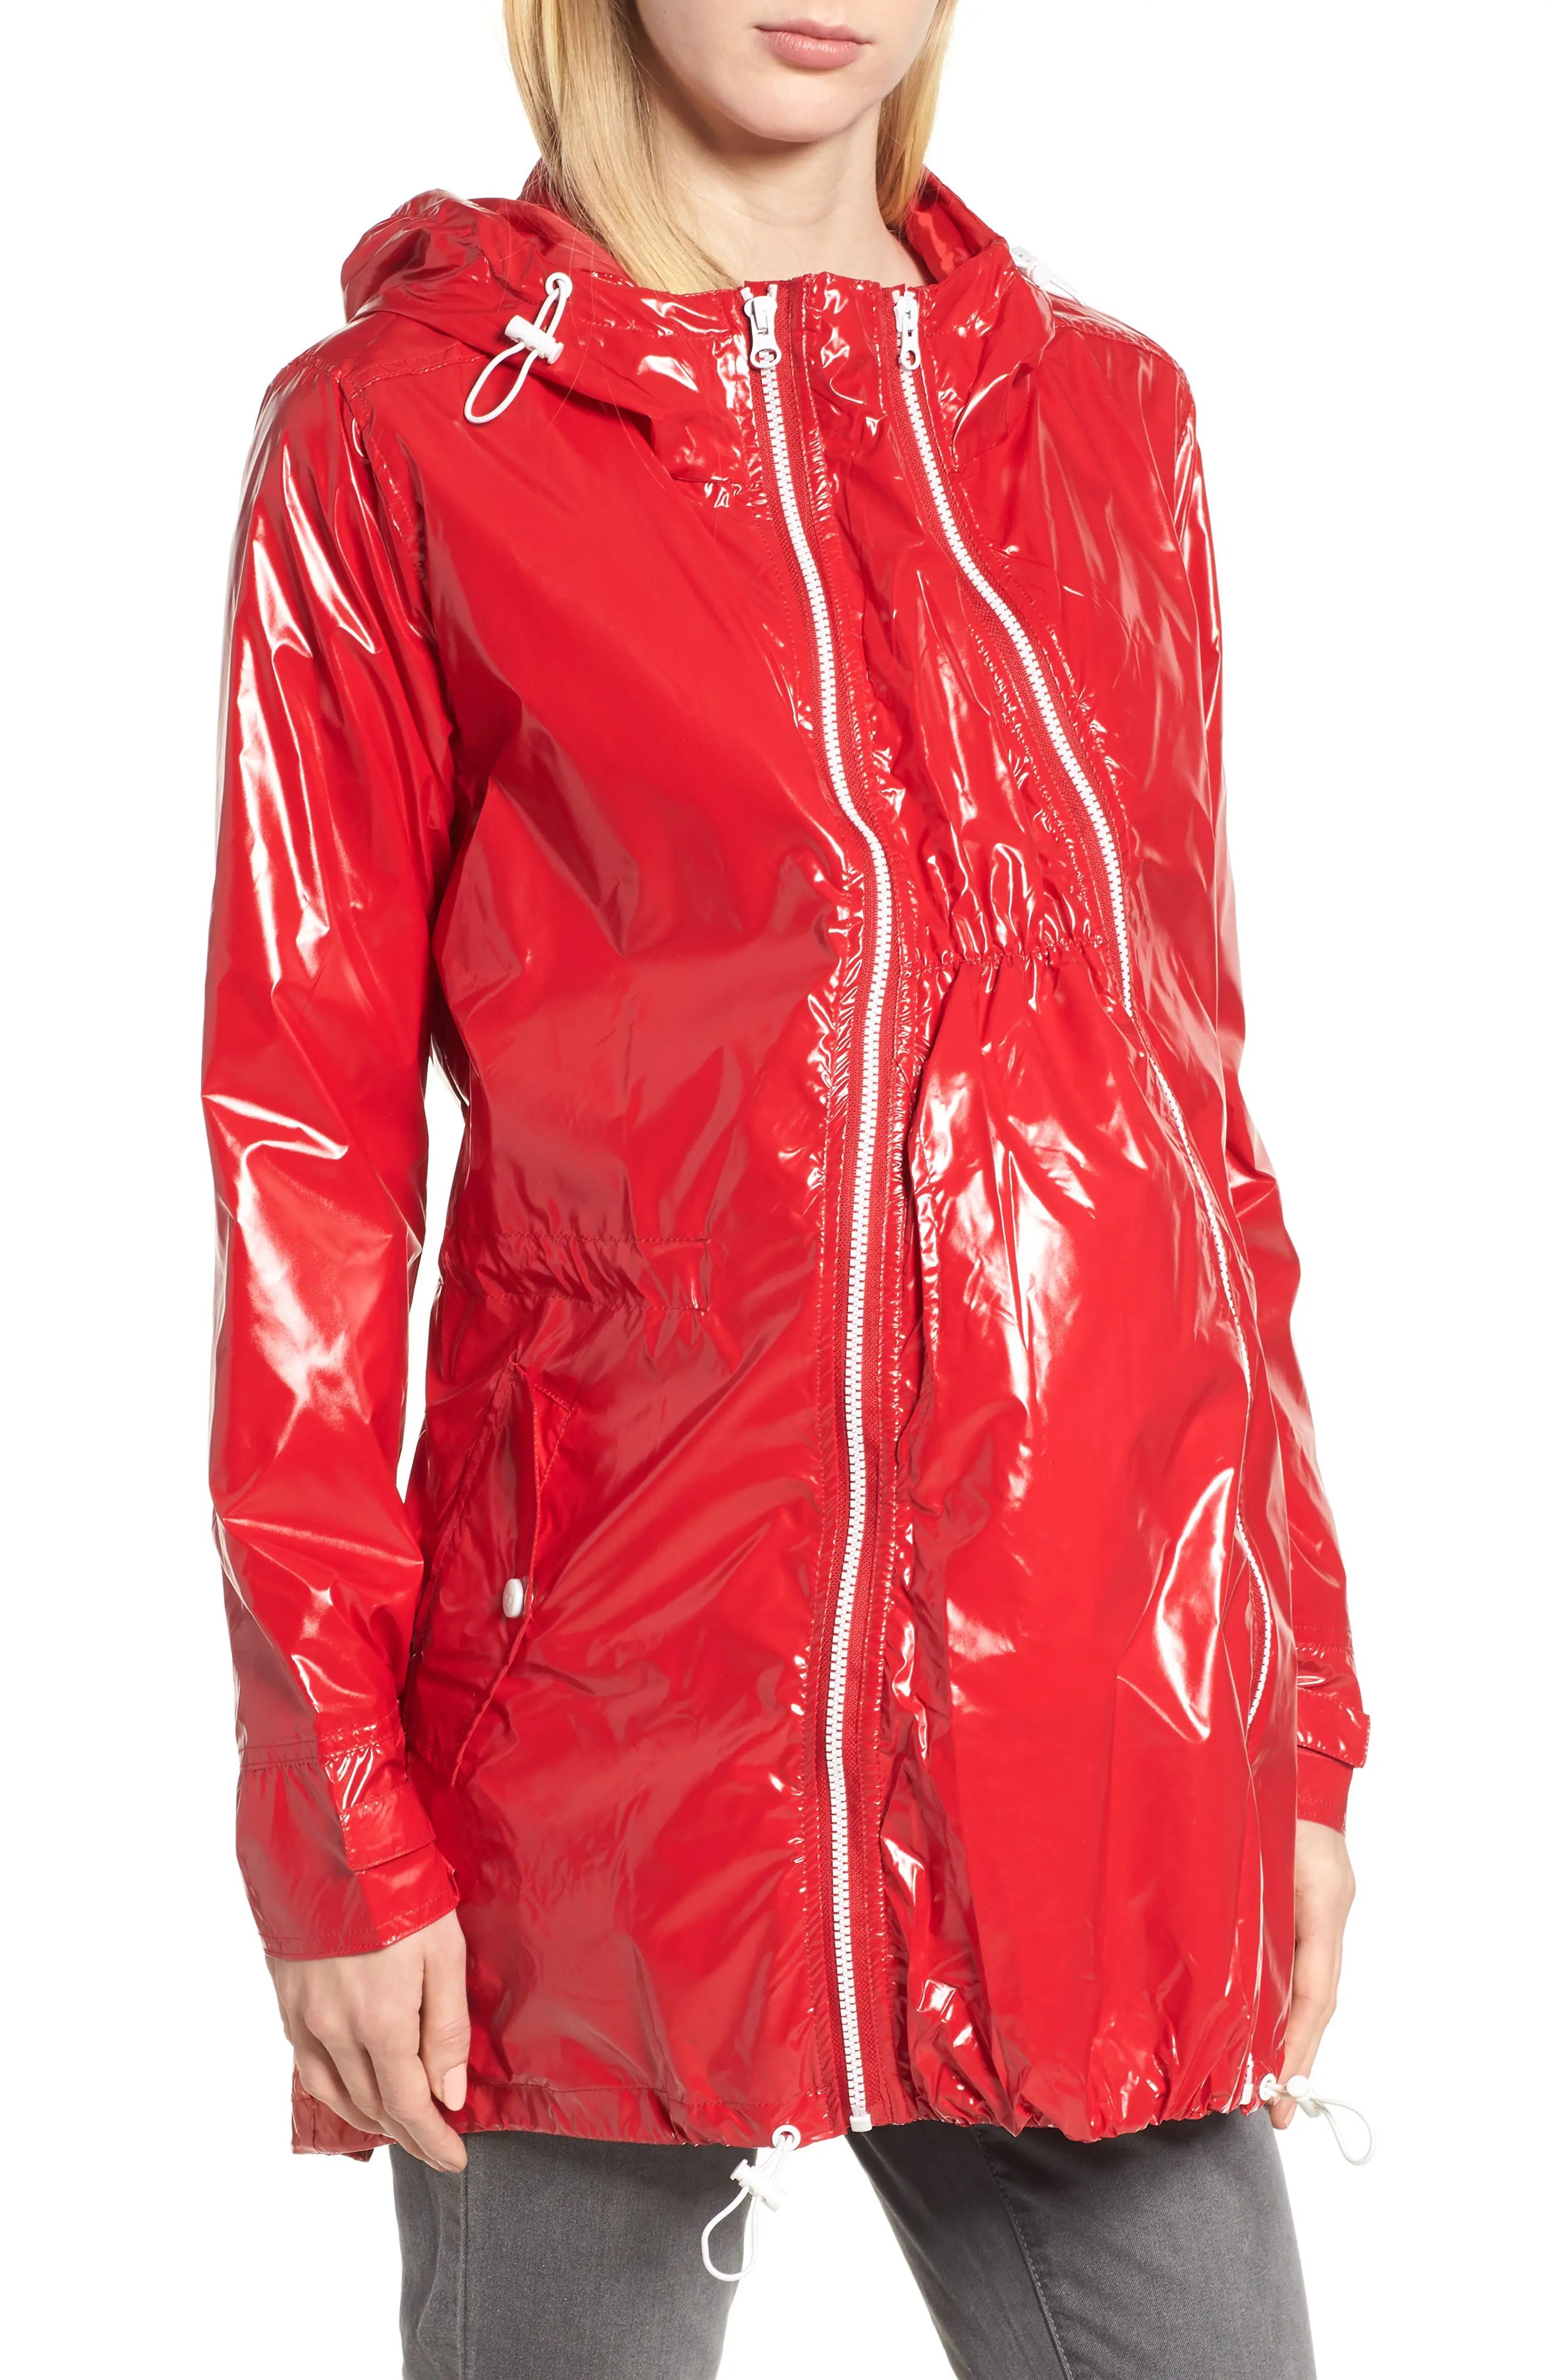 Modern Eternity Waterproof Convertible 3-in-1 Maternity Raincoat in Red at Nordstrom, Size Small | Nordstrom